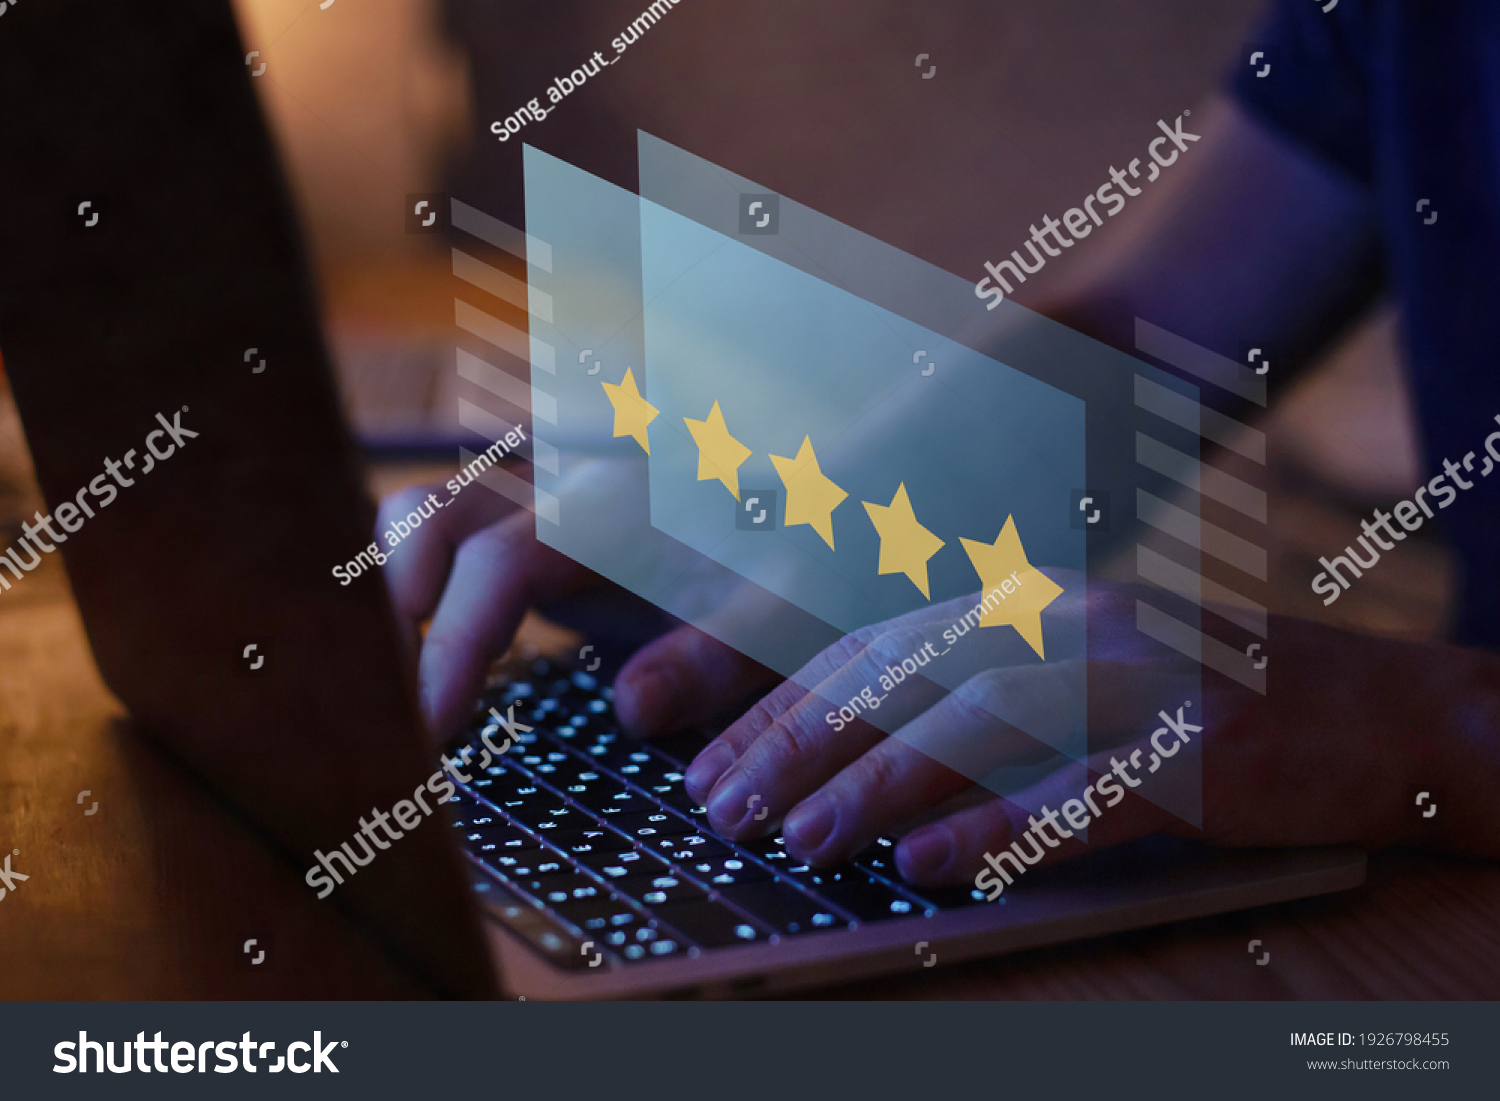 writing review on internet with 5 star rating, reputation management concept #1926798455